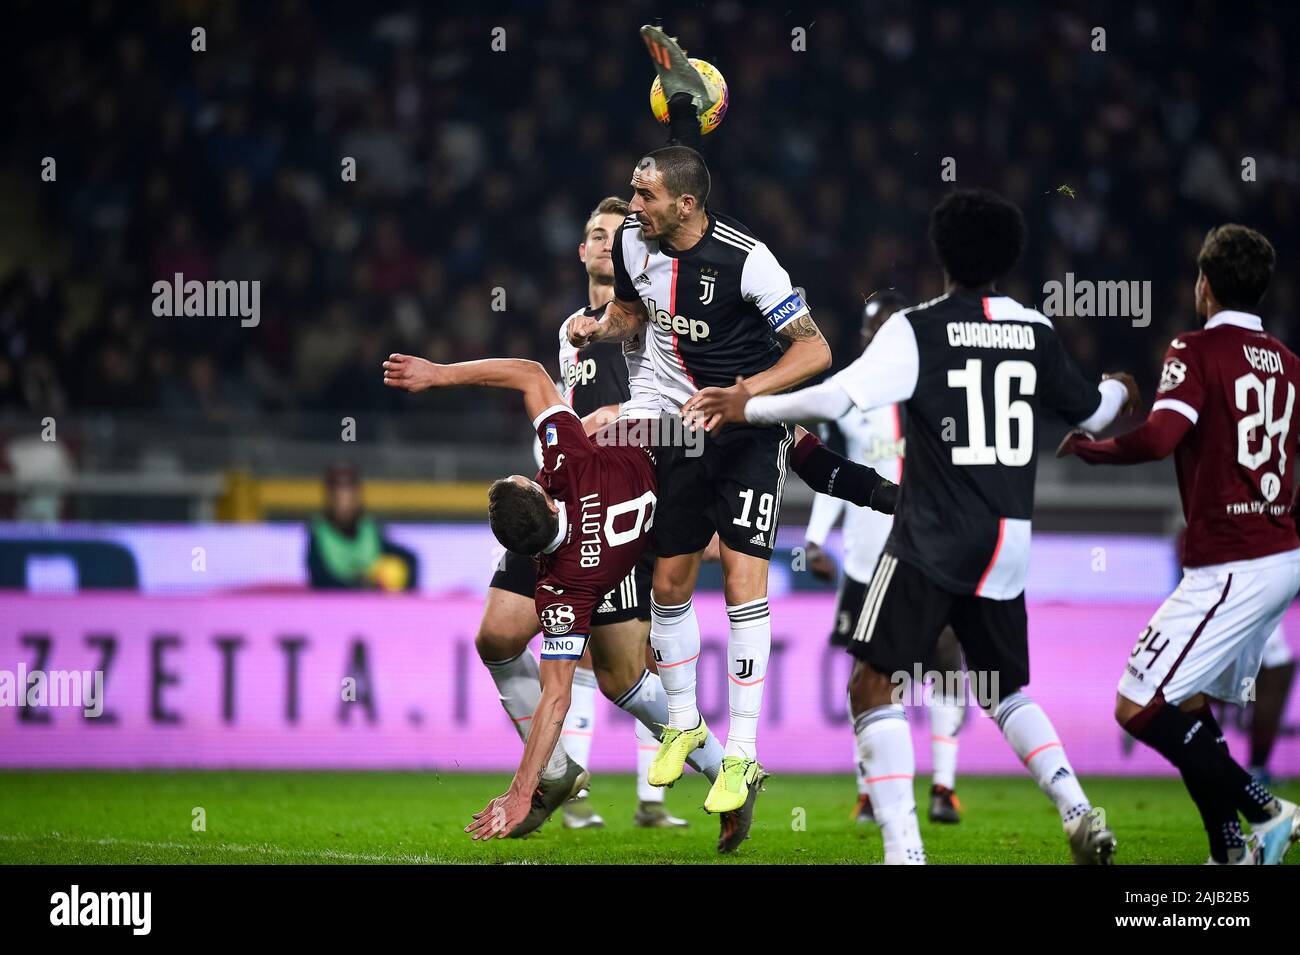 Turin, Italy - 02 November, 2019: Andrea Belotti of Torino FC attempts a bicycle kick during the Serie A football match between Torino FC and Juventus FC. Juventus FC won 1-0 over Torino FC. Credit: Nicolò Campo/Alamy Live News Stock Photo